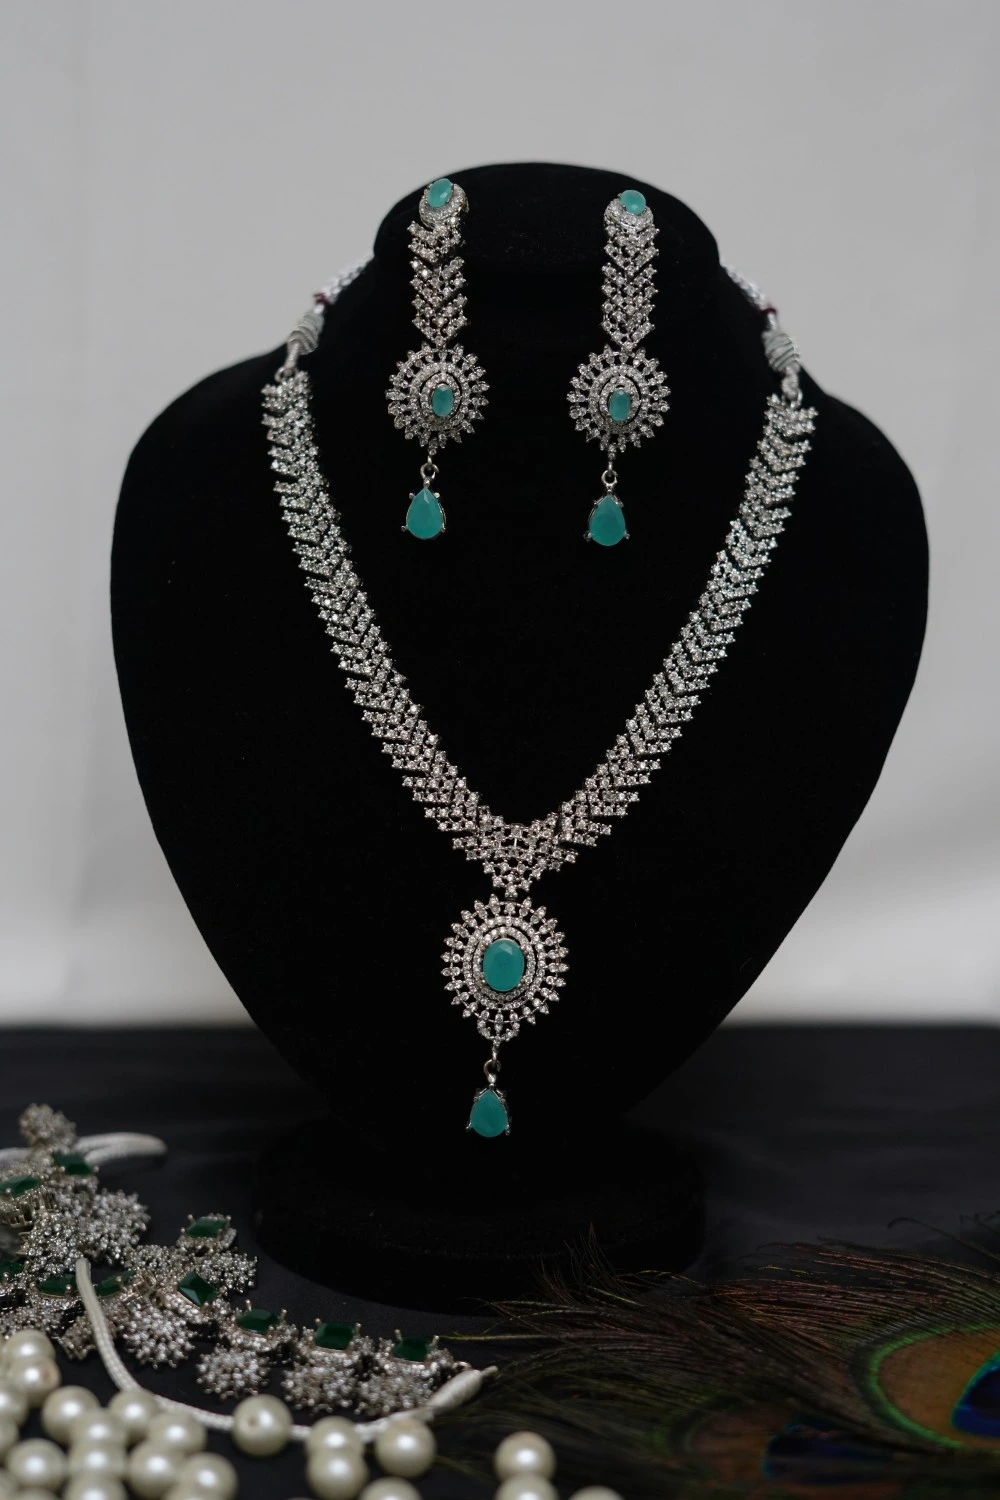 Necklace with earrings in turquoise color